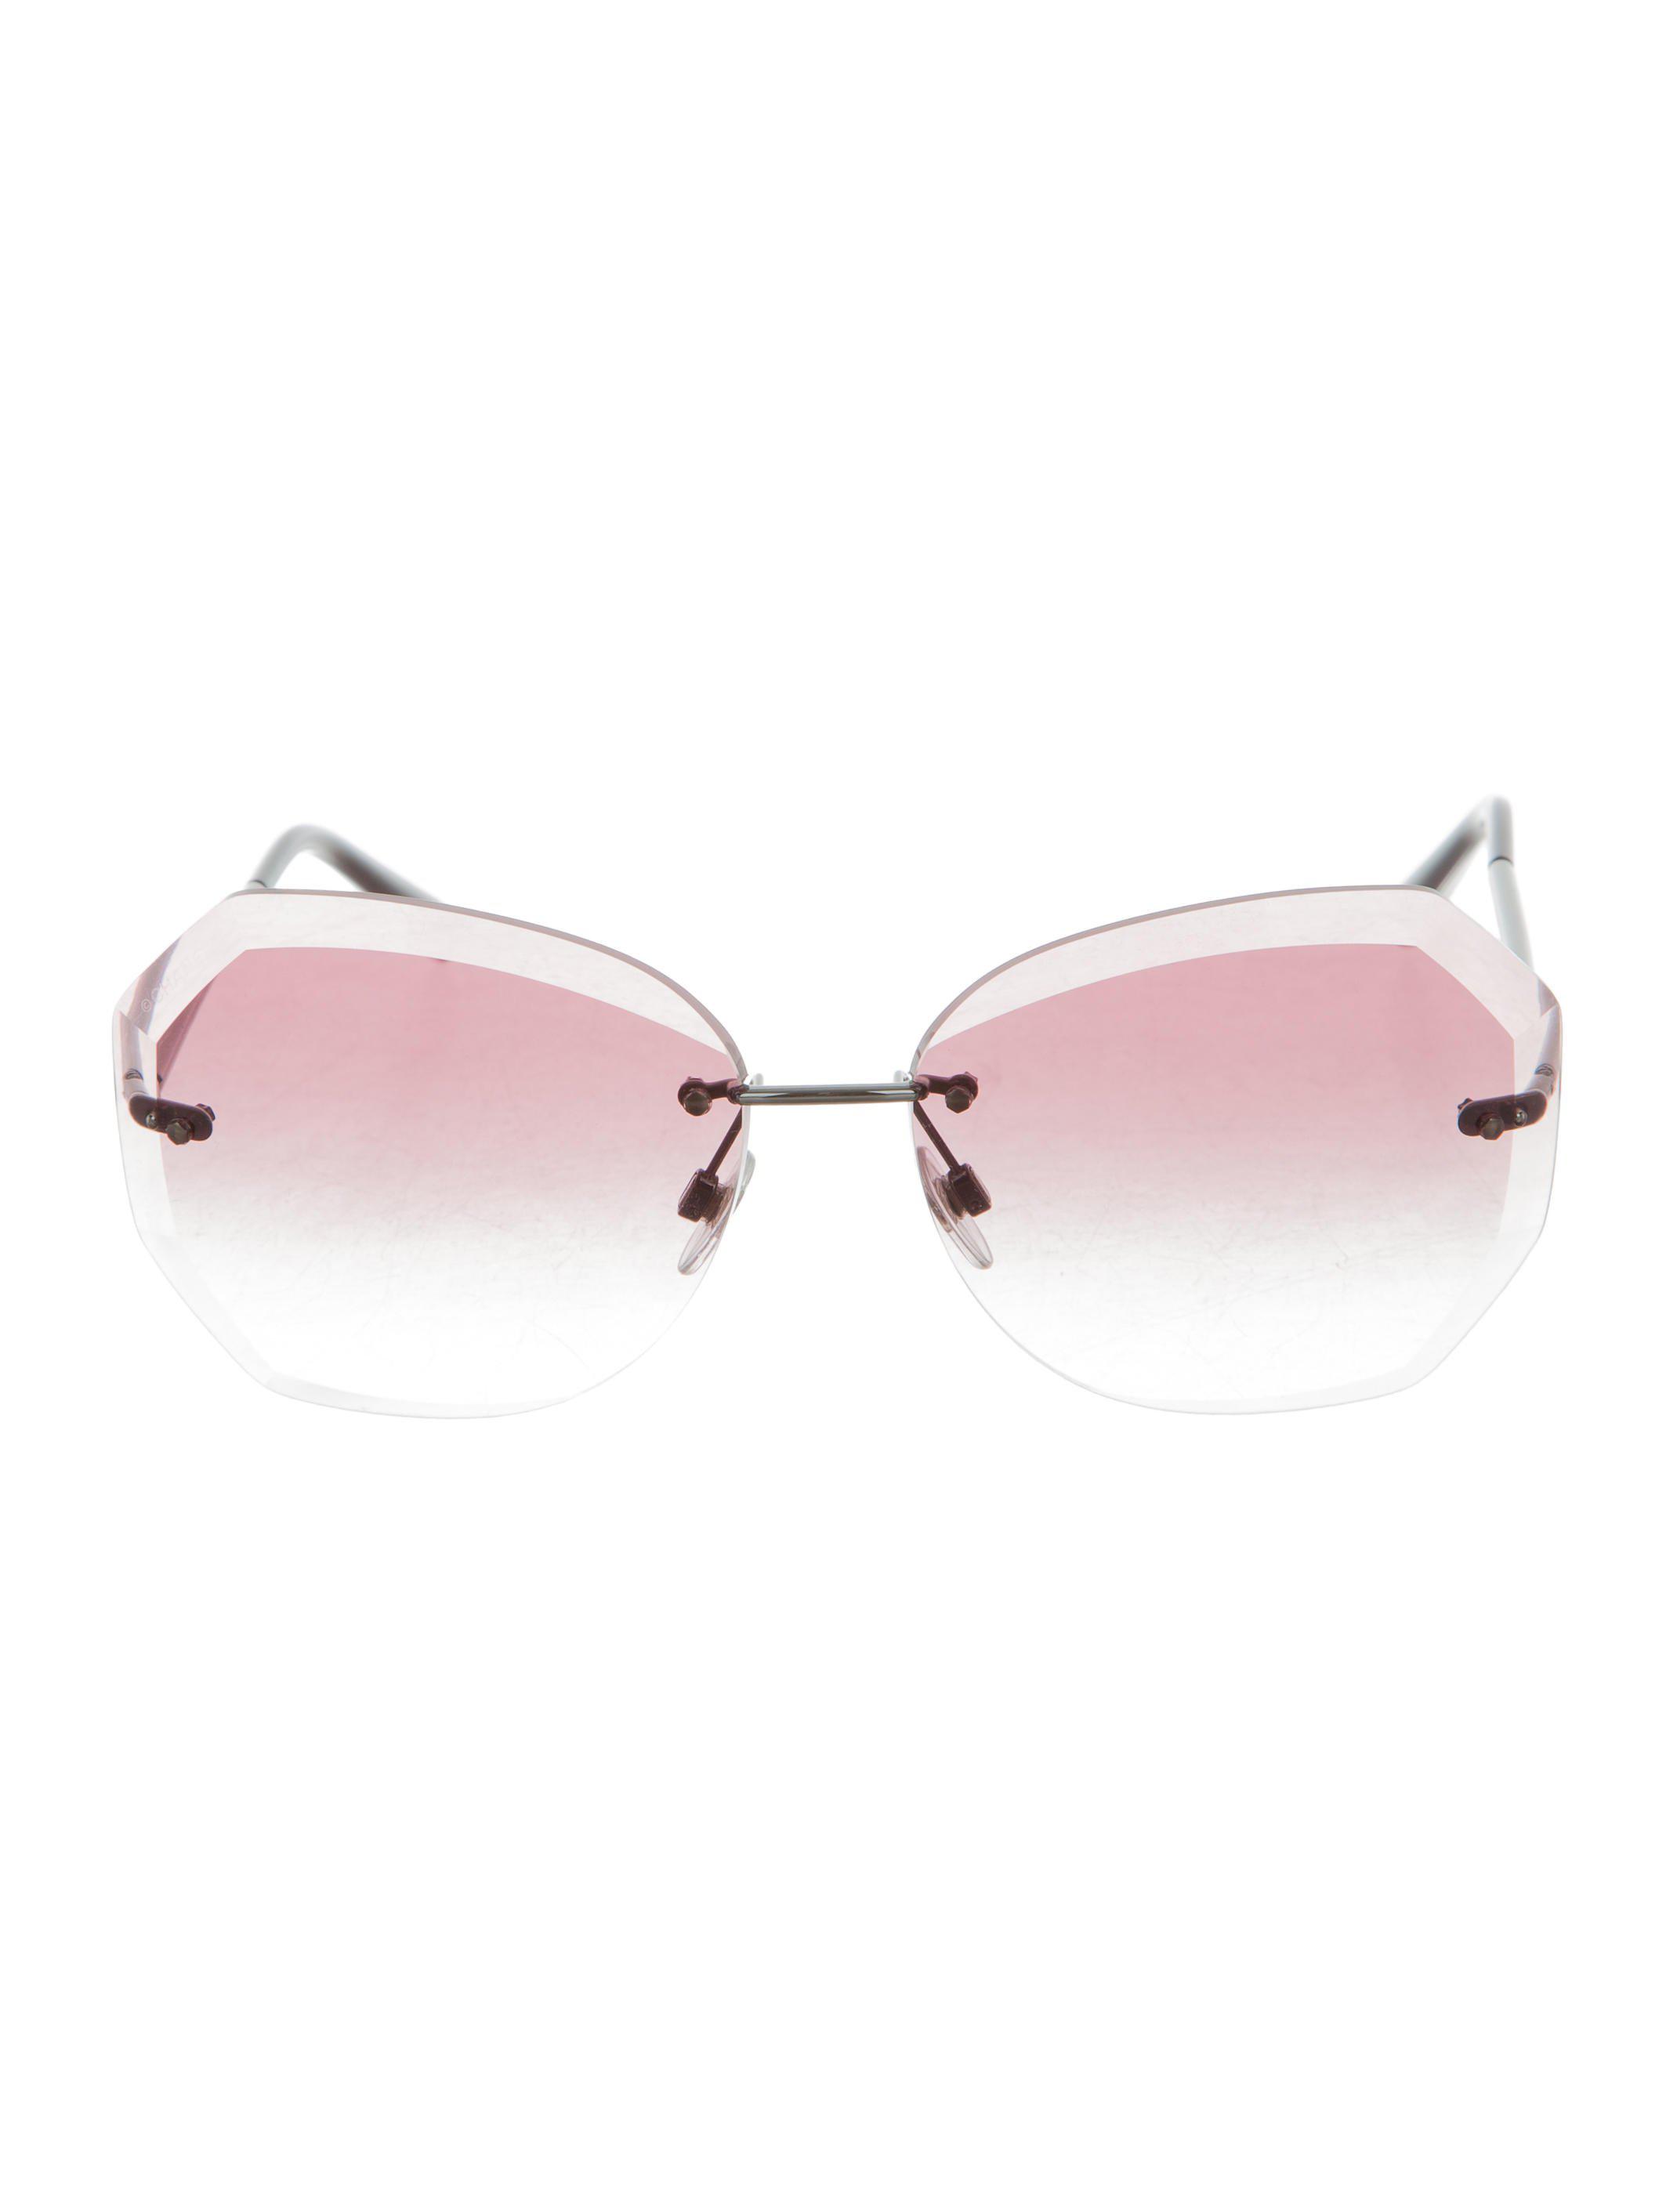 Lyst - Chanel 2017 Round Spring Sunglasses W/ Tags in Pink